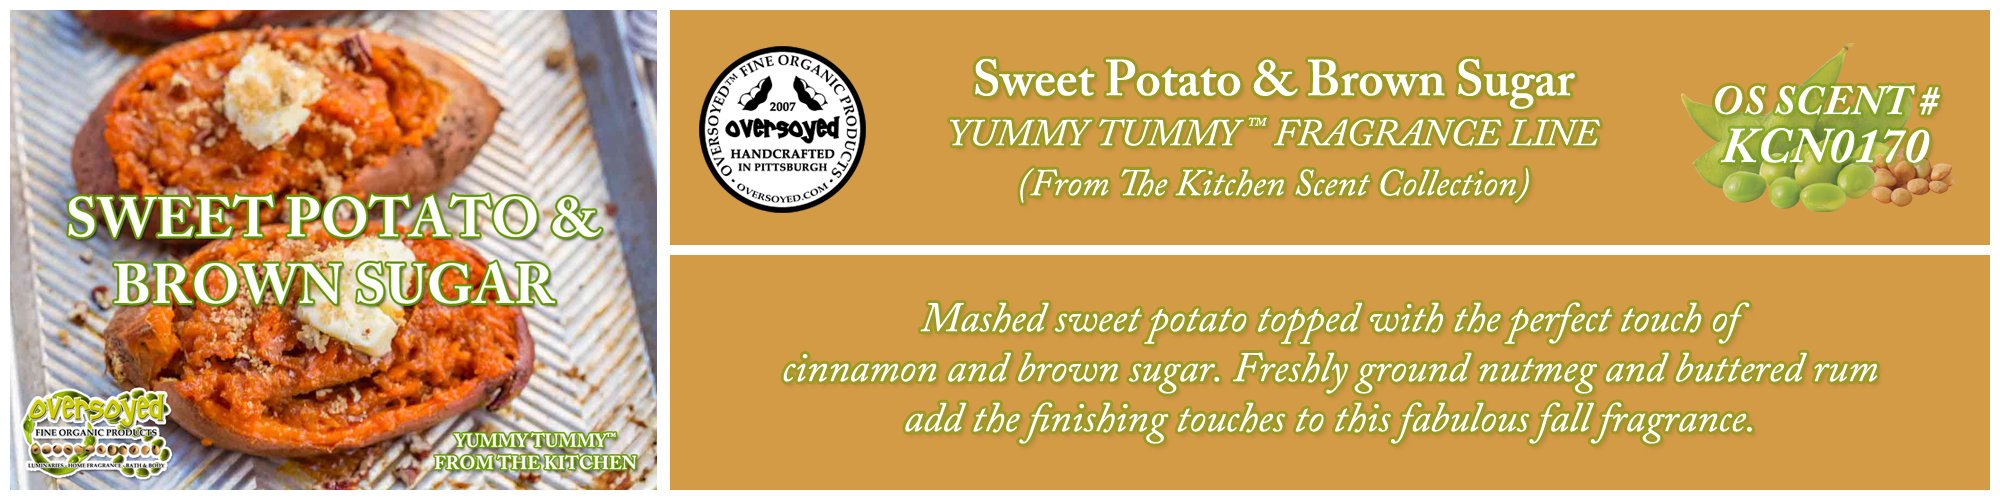 Sweet Potato & Brown Sugar Handcrafted Products Collection